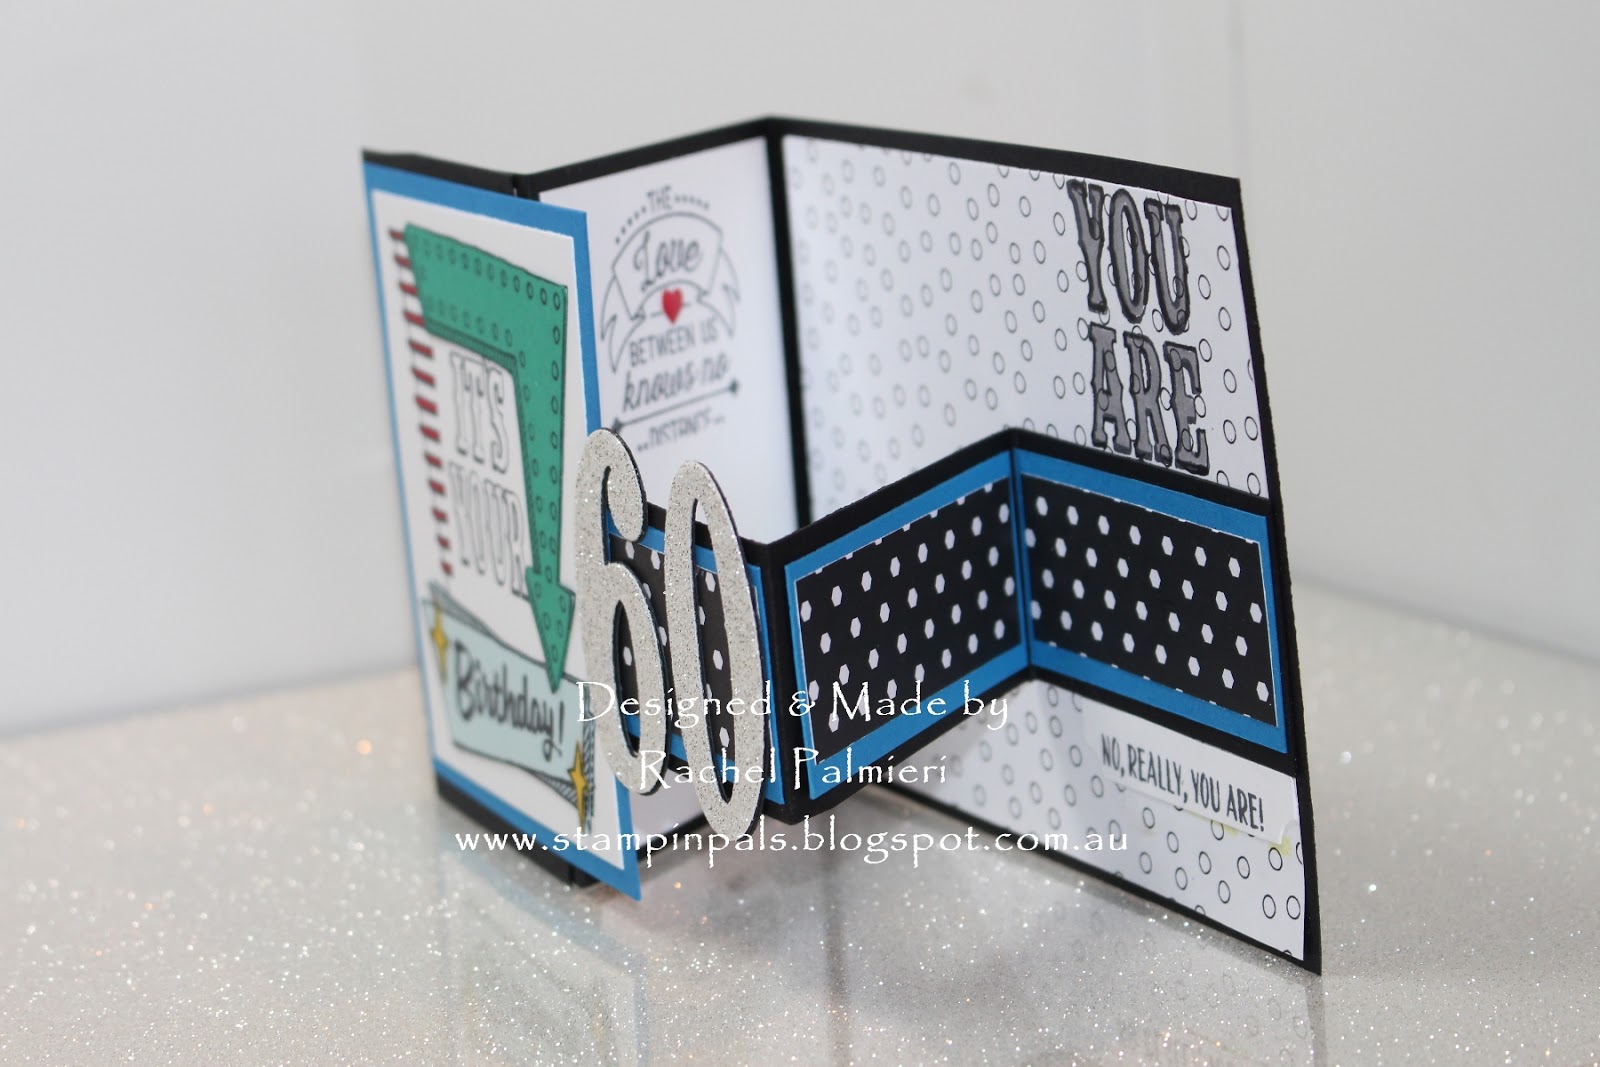 Stampin' Pals: 60th Birthday Cards - Handmade With Love